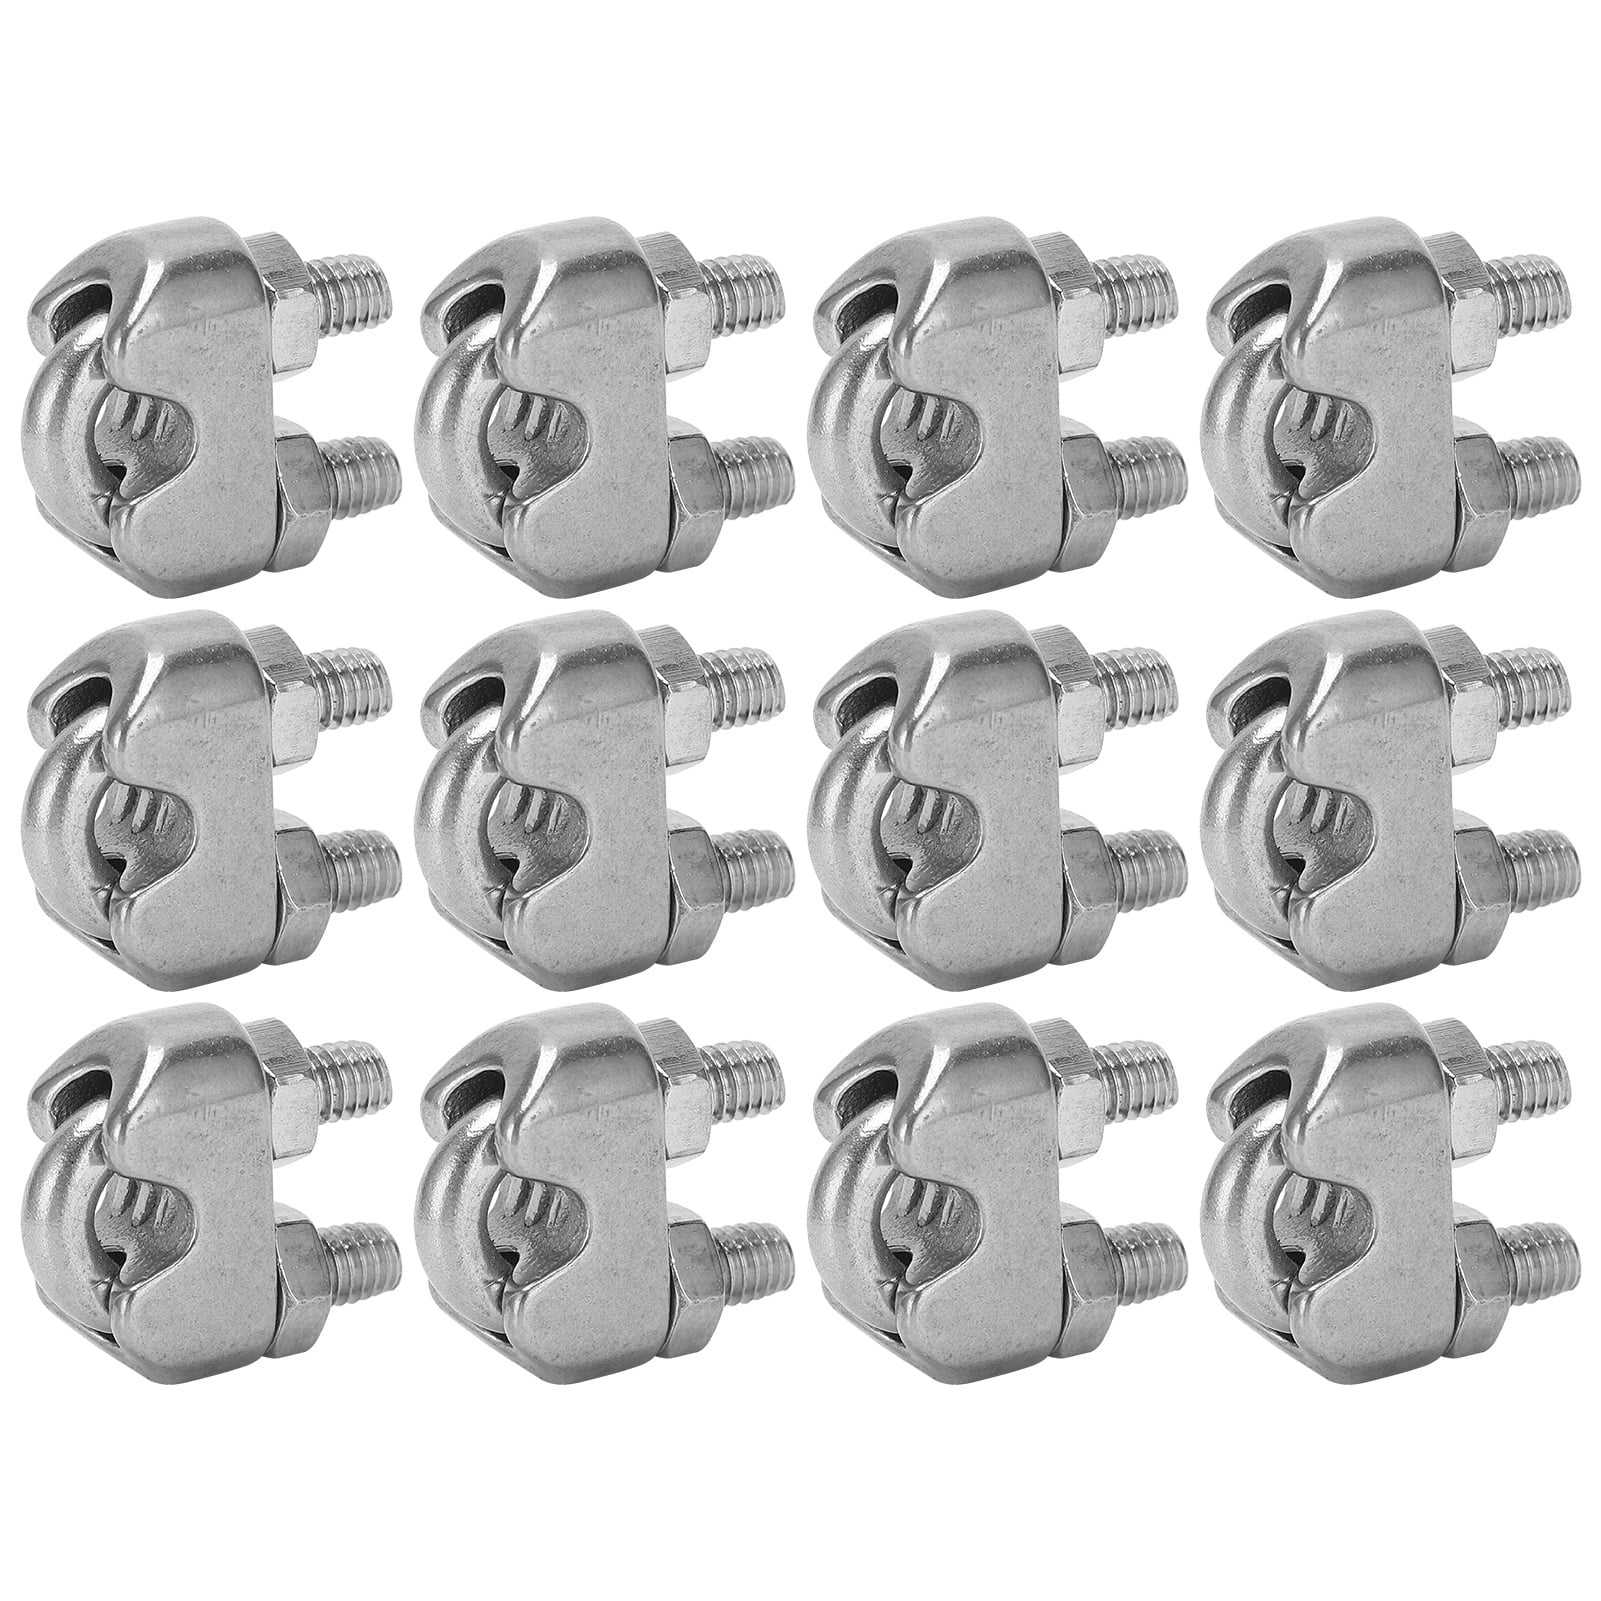 Cable Wire Rope Cable Clip Clamp Stainless Steel U Bolts Saddle Clamp 12pcs 1/8 Inch M3 Wire Rope Cable Clip Used for Wire Rope